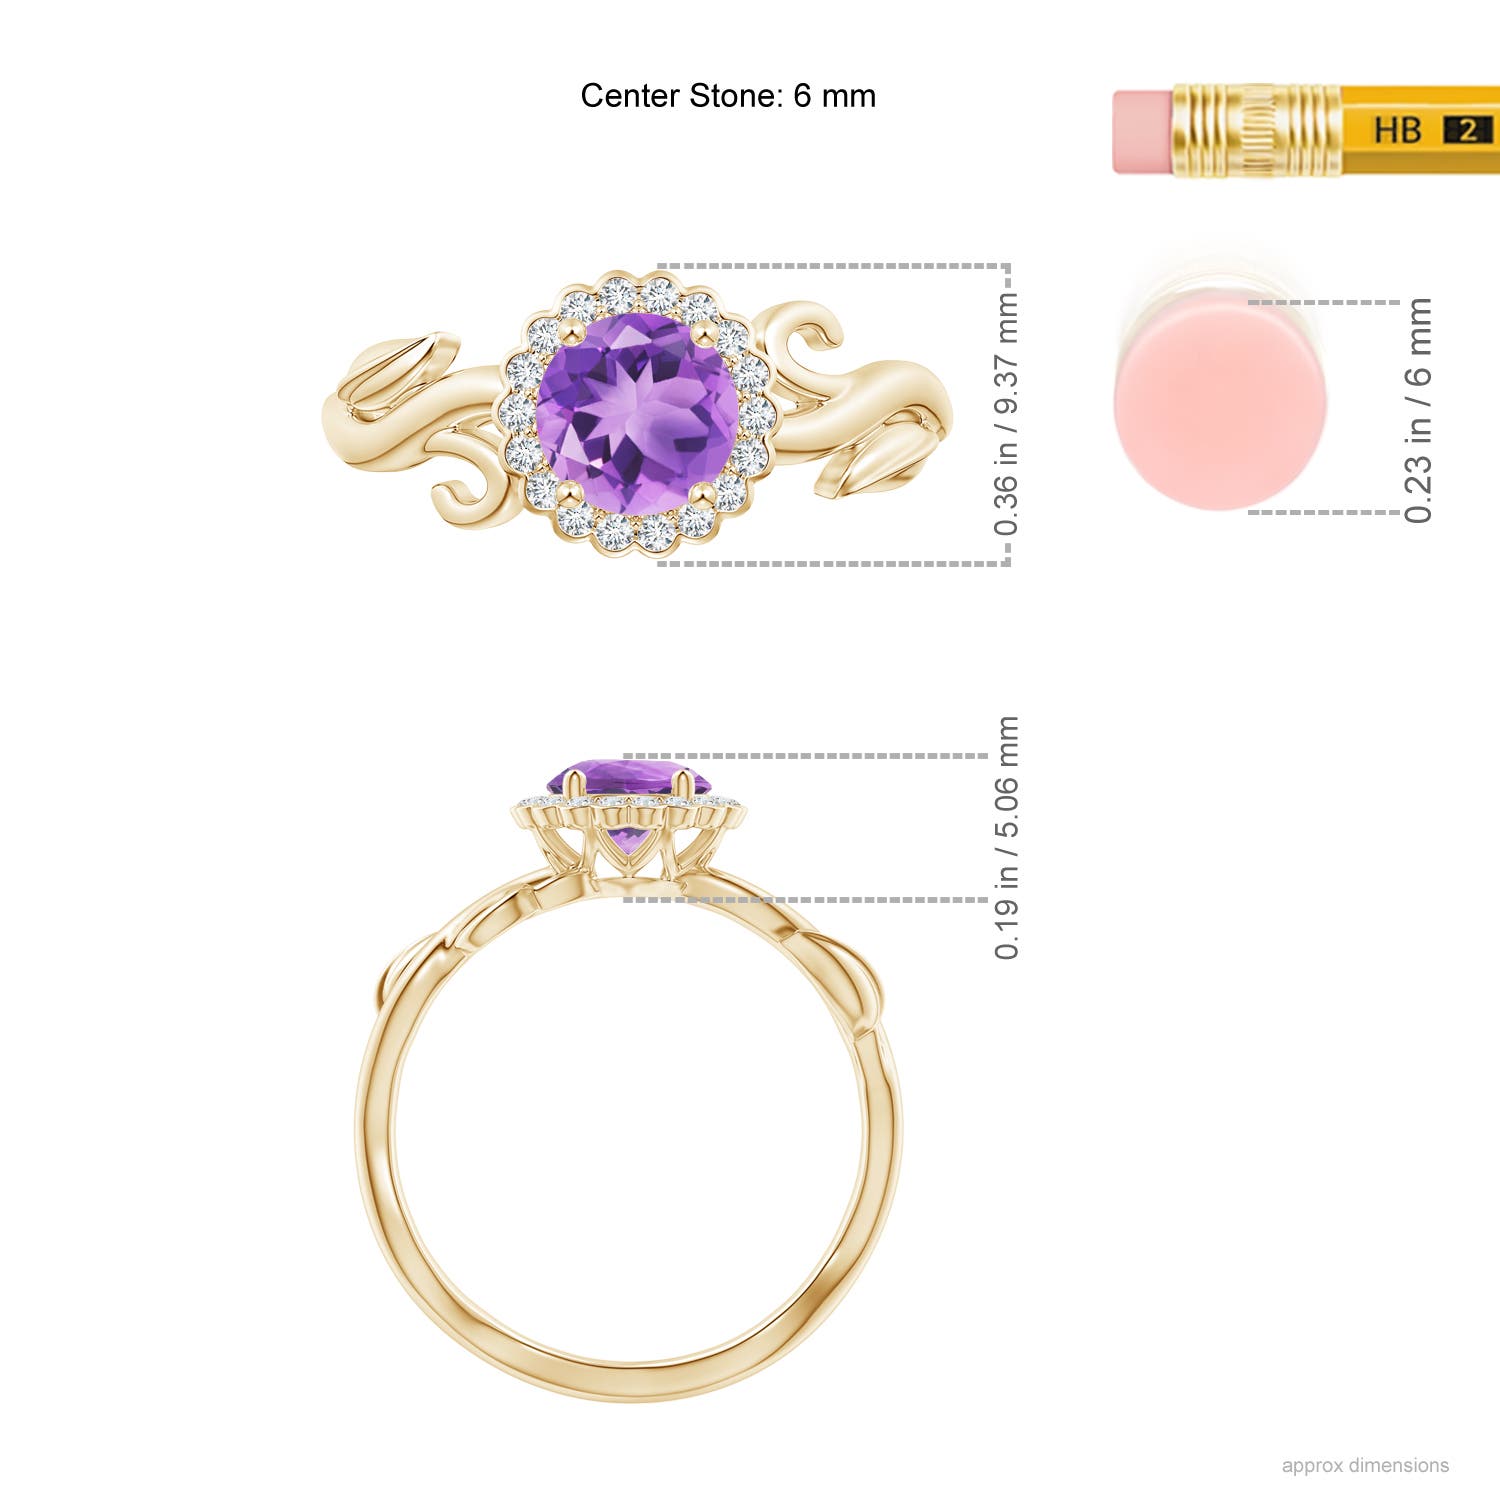 A - Amethyst / 0.91 CT / 14 KT Yellow Gold